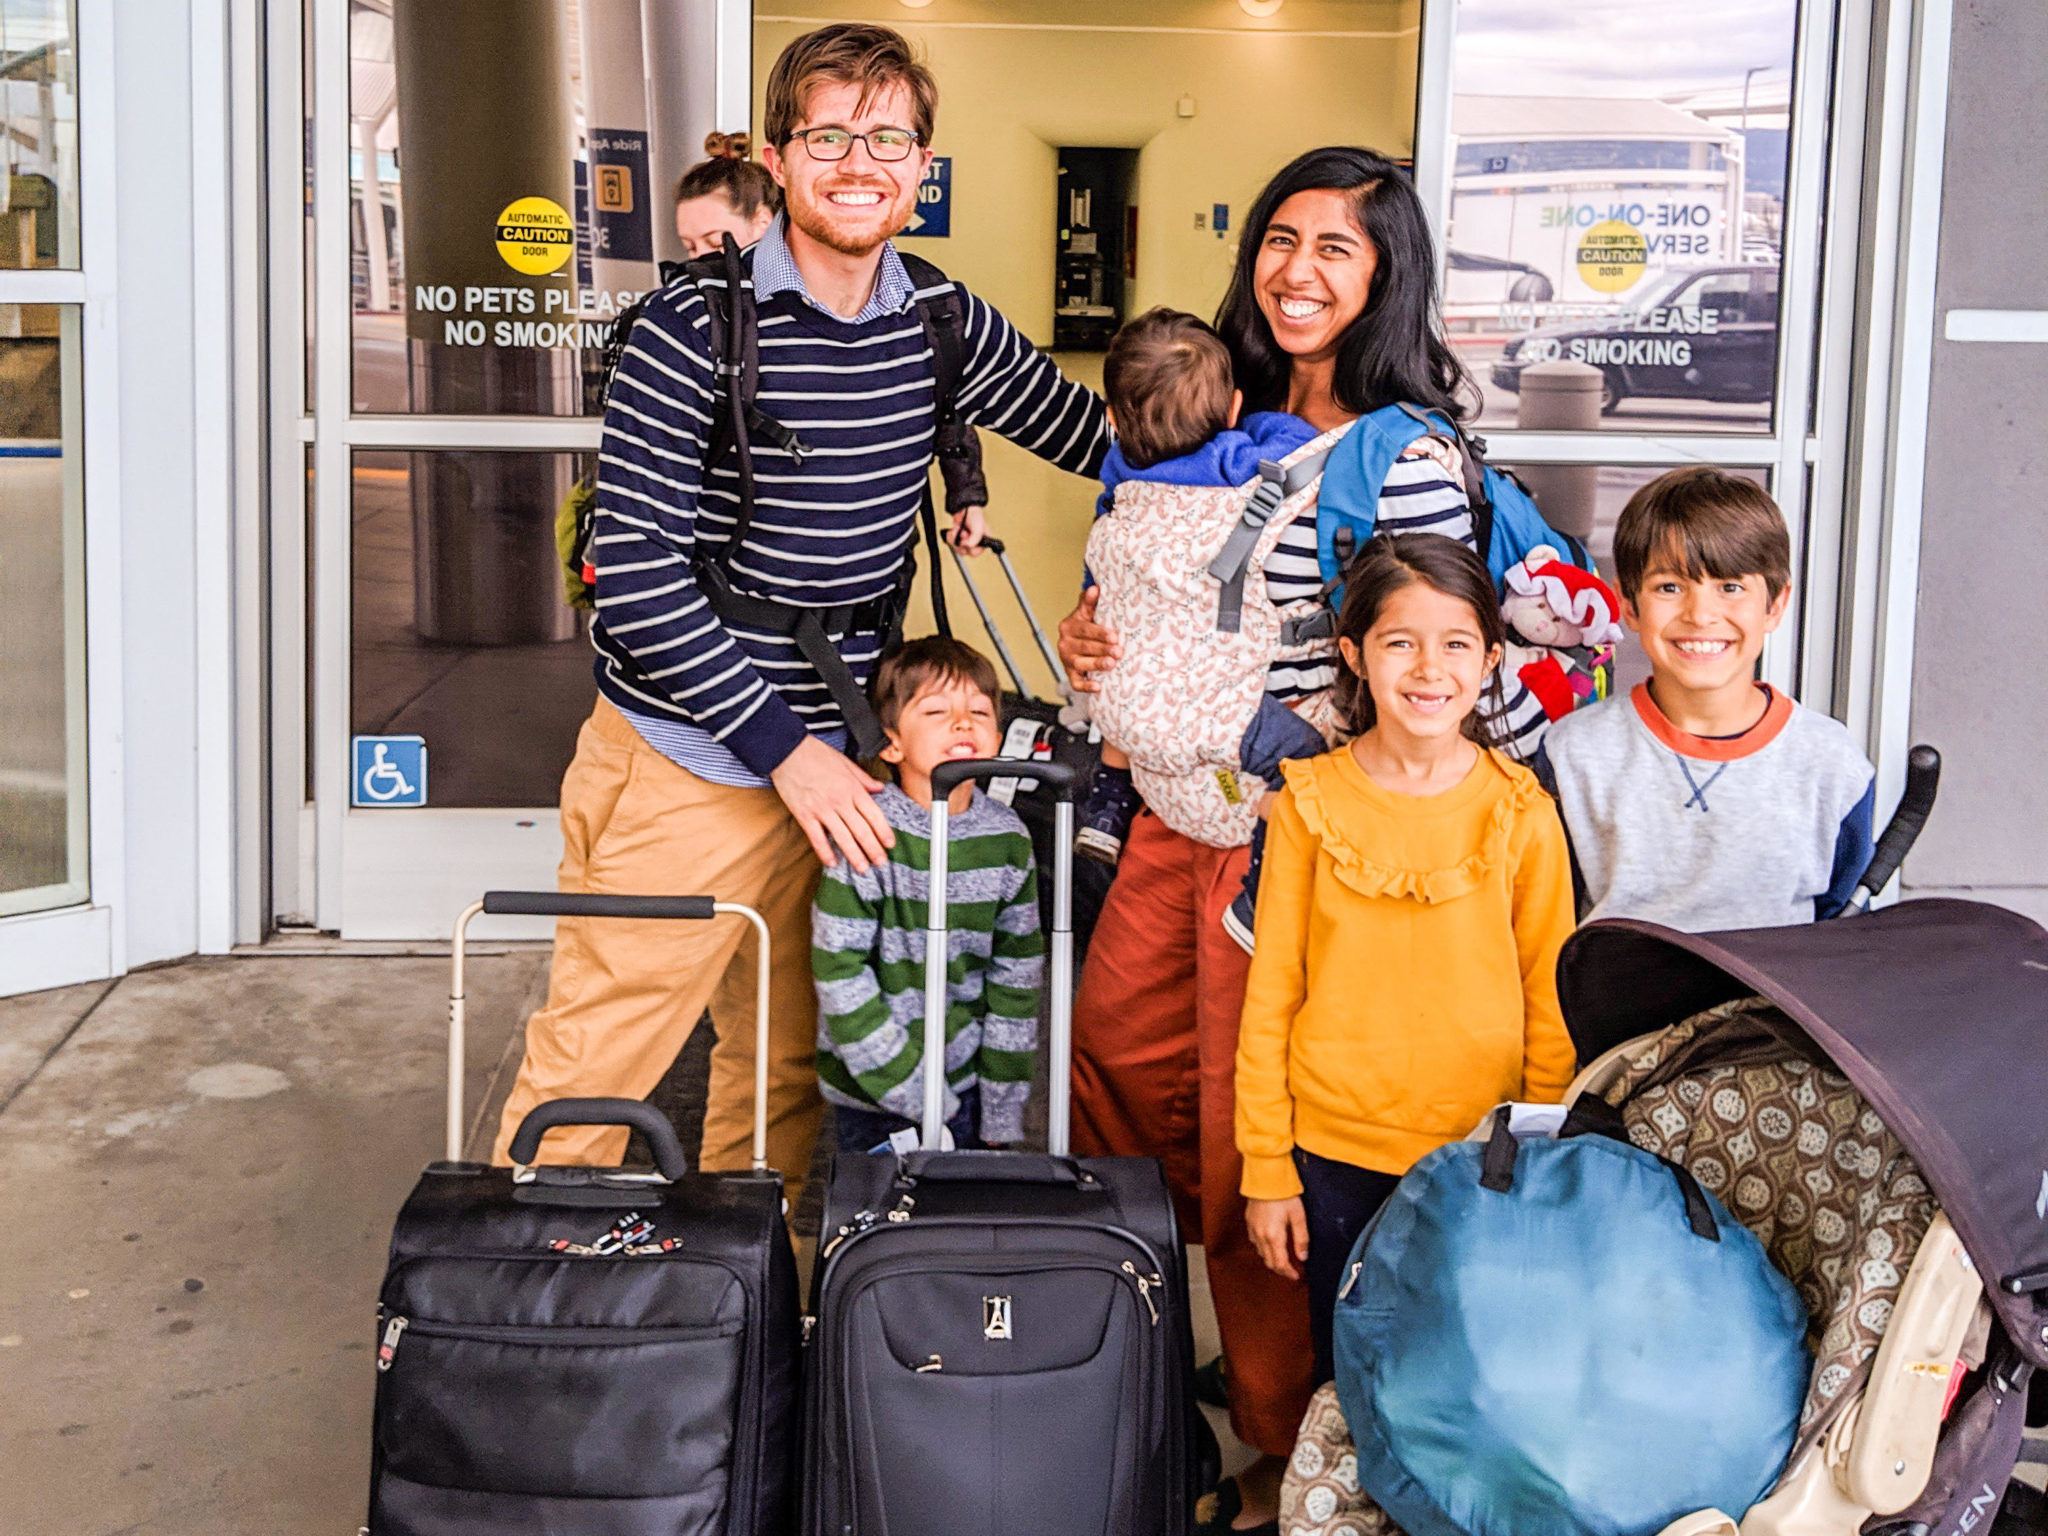 10 Family Travel Must-haves for Long Flights